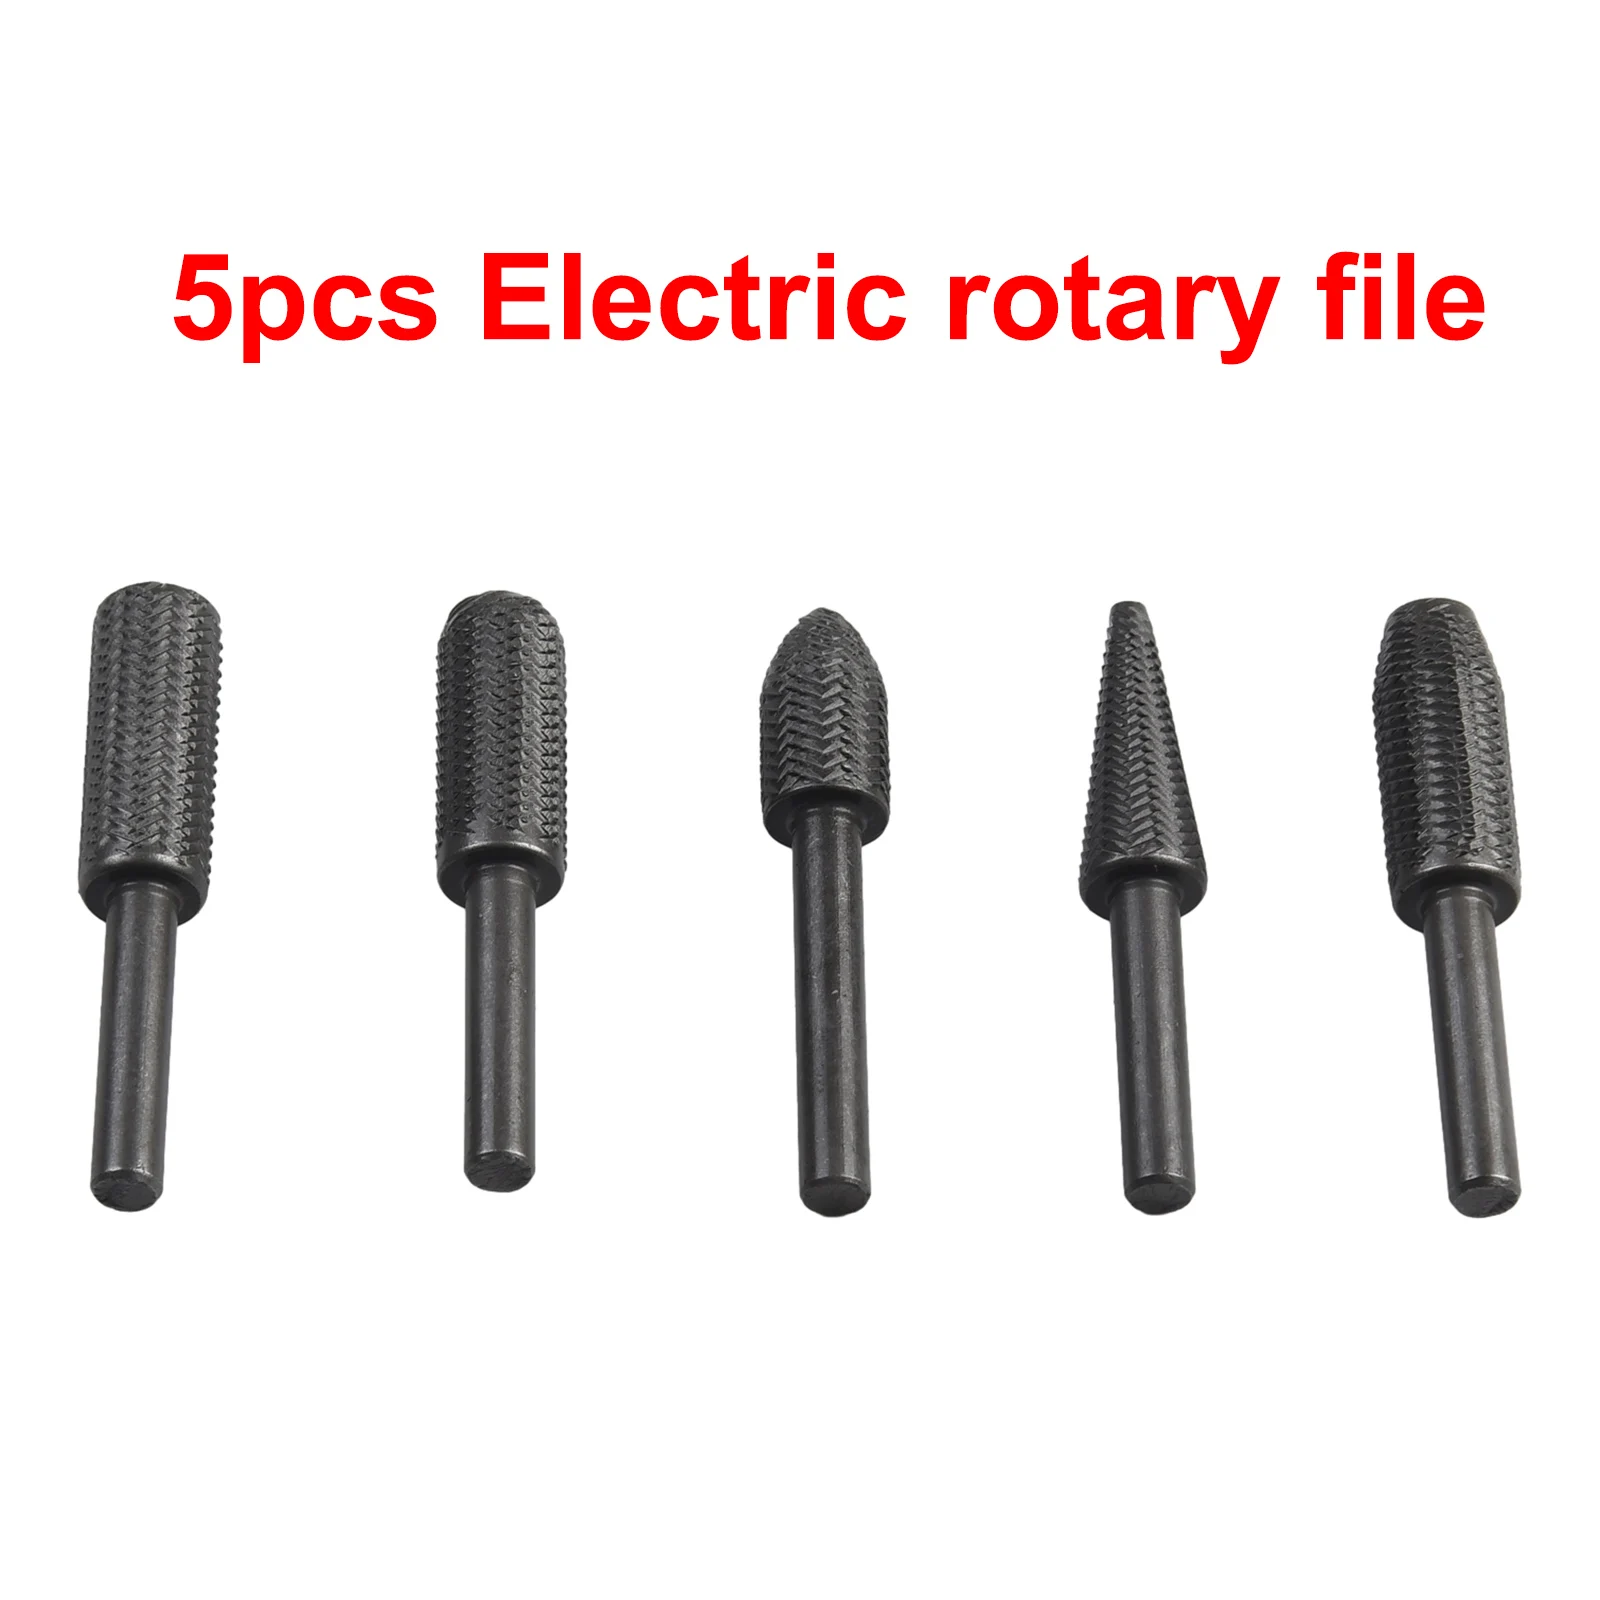 

5Pcs Set Rotary Rasp File Electric Grinding Home Garden Power Tools Rotary Tools Steel Workshop Equipment For Metal Derusting